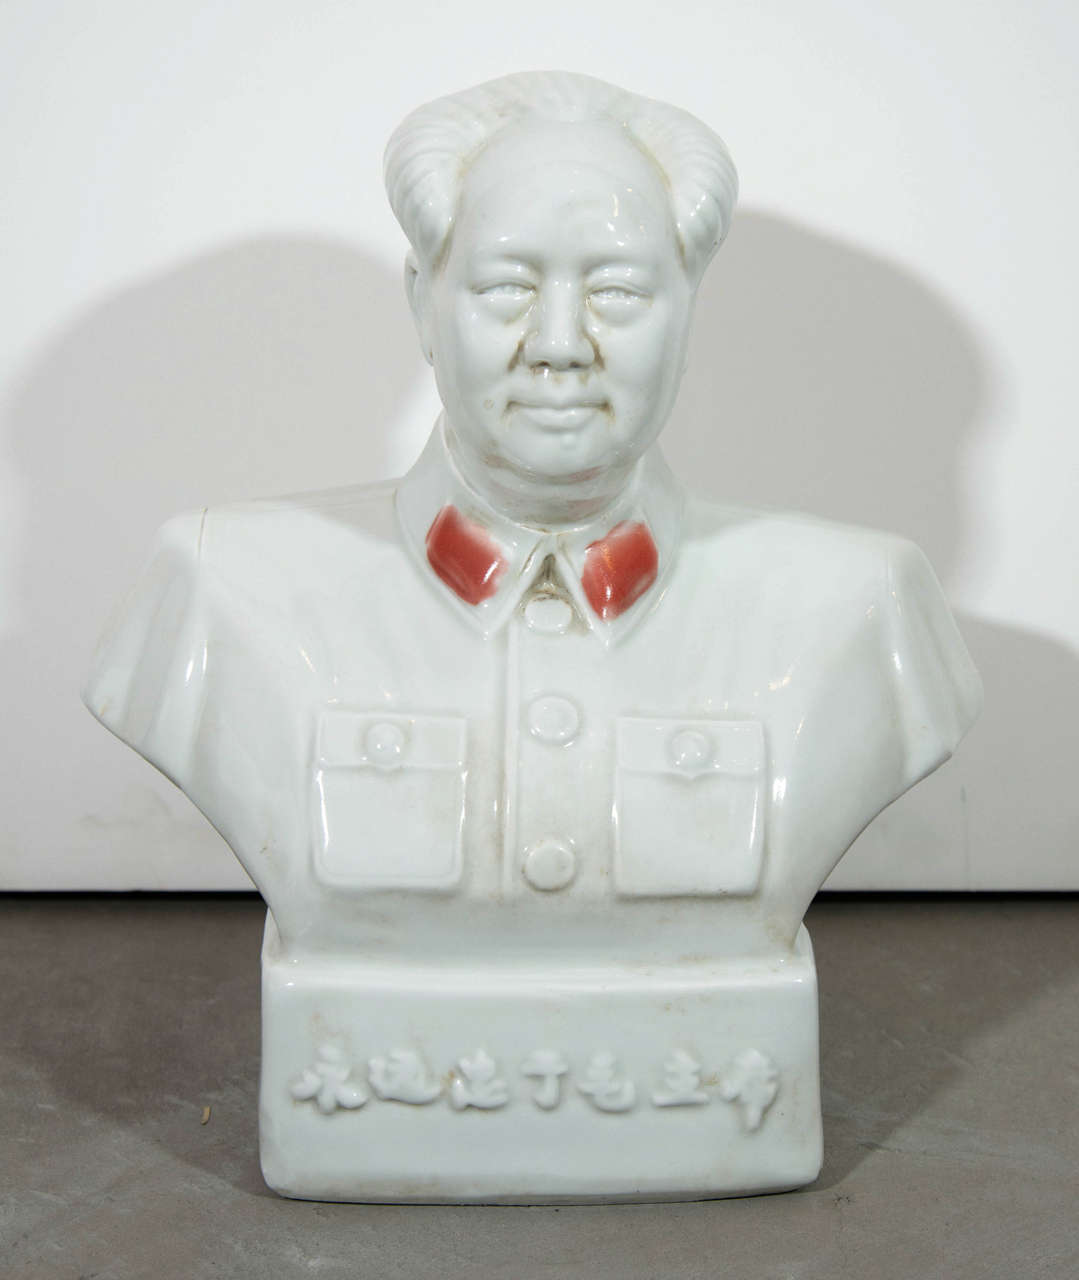 A 1960's cultural revolution bust of Chairman Mao with unusual red collars. A striking piece.
Beijing, c. 1960's.
CR750